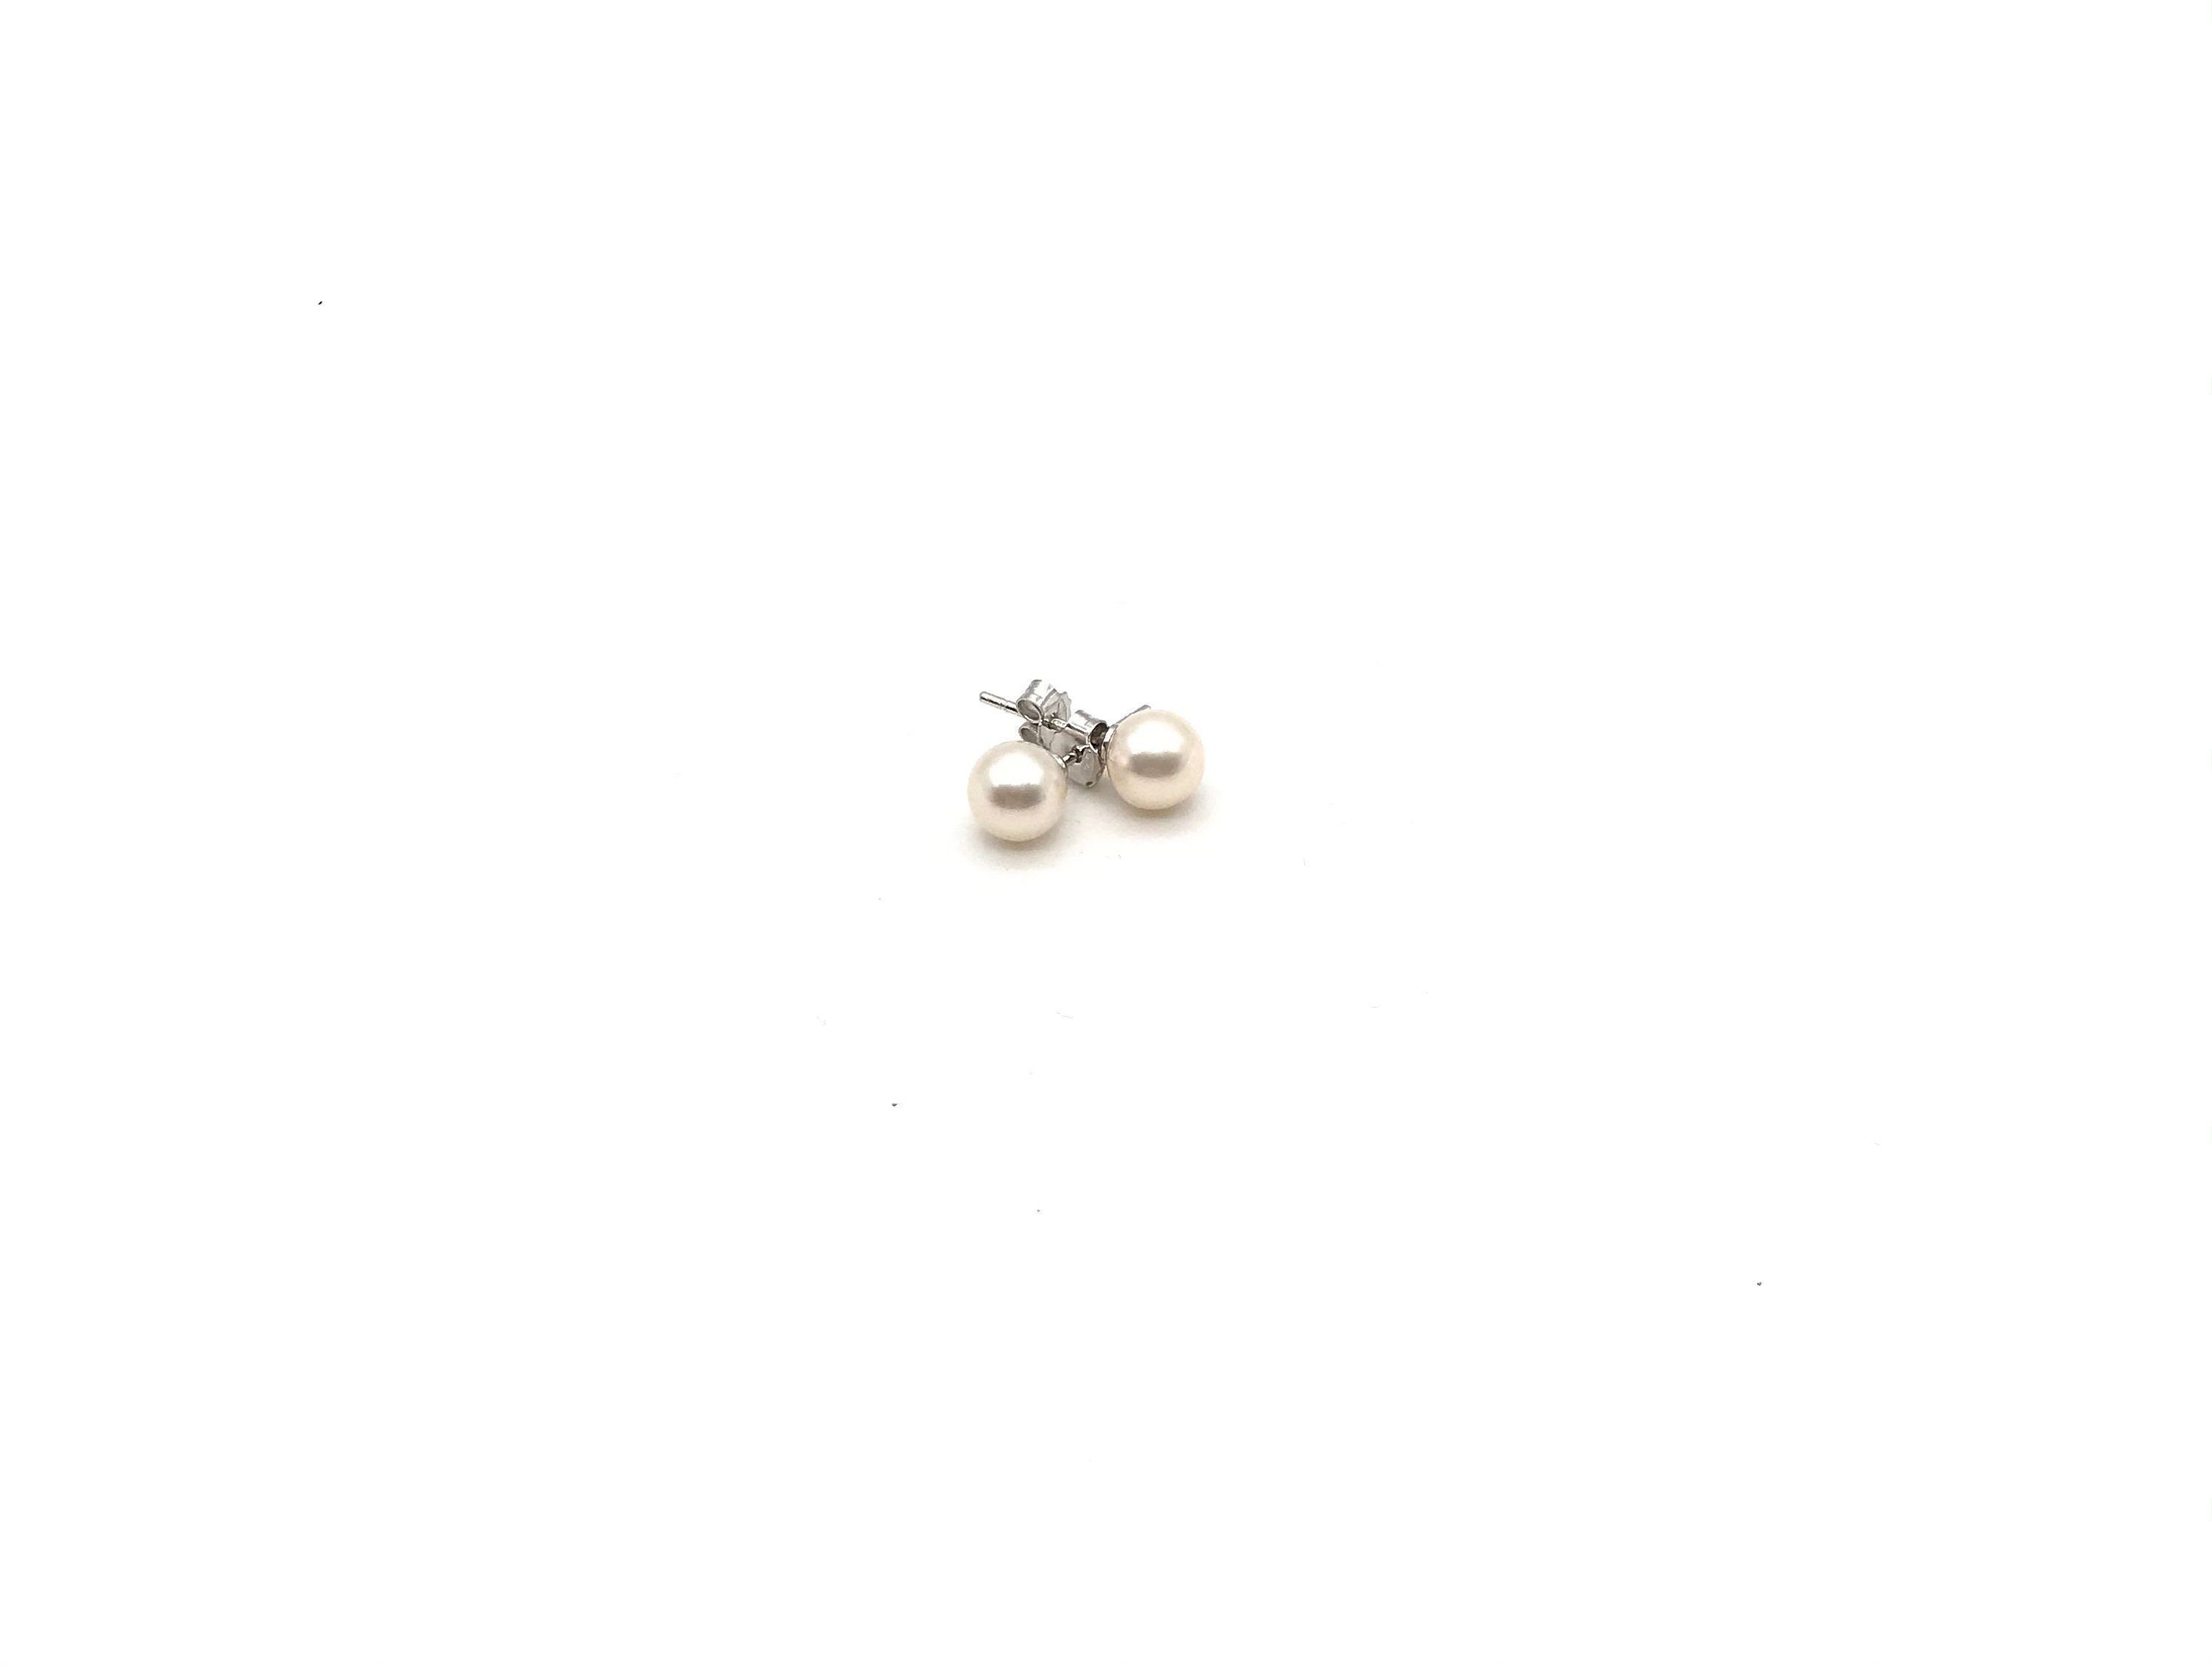 18K White Gold Earrings With Natural Pearls Pearl Studs Great Gift For Her